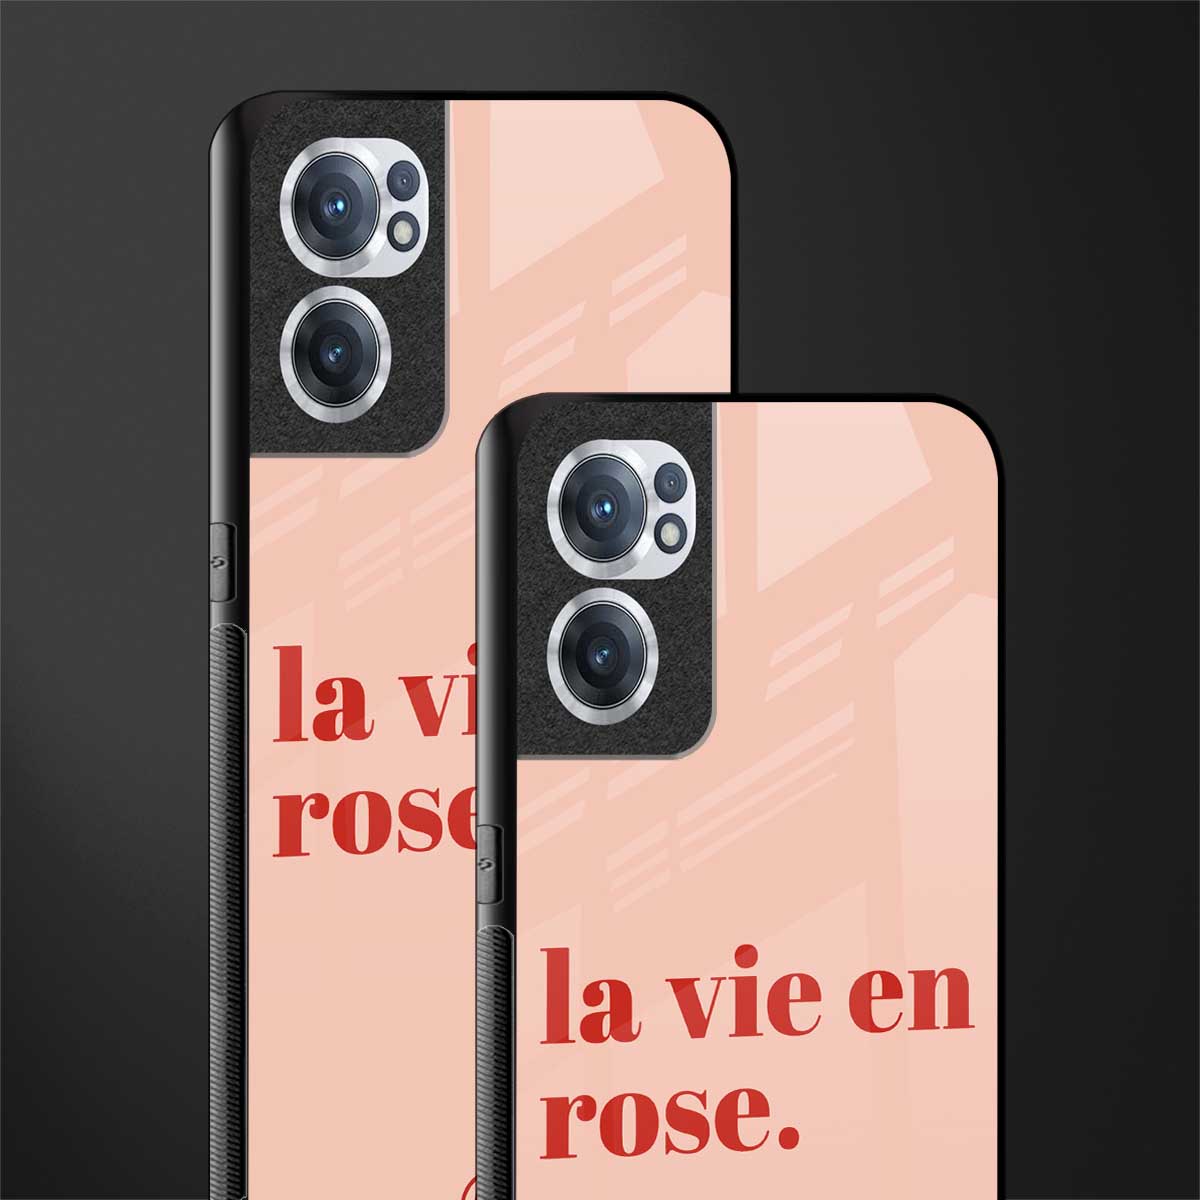 la vie en rose quote glass case for oneplus nord ce 2 5g image-2